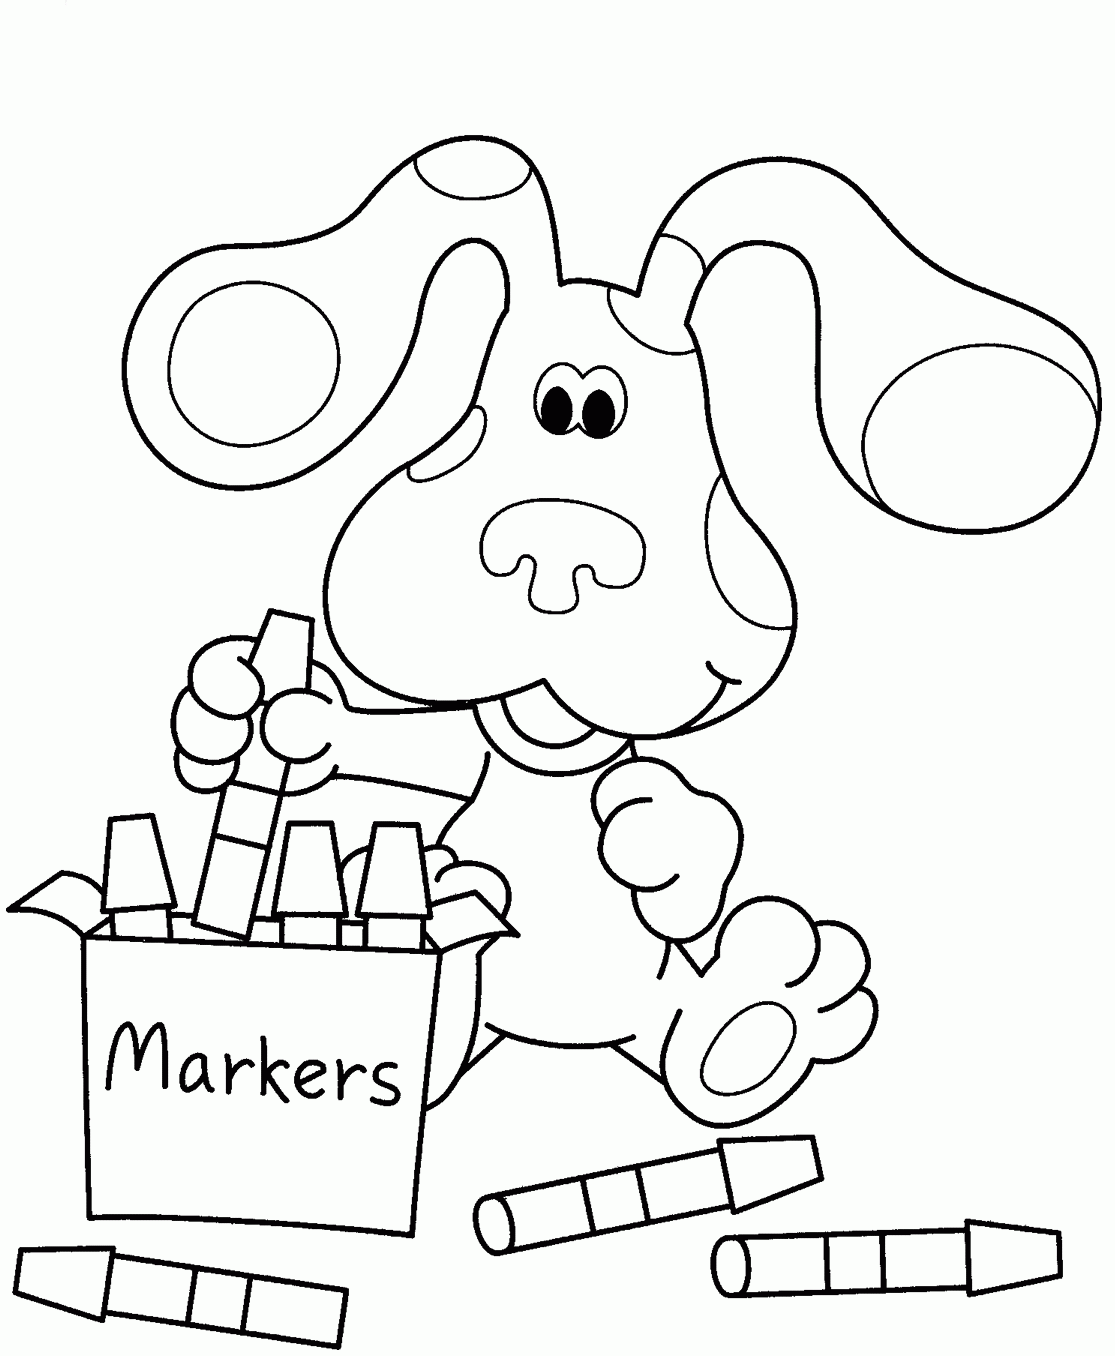 Nick Jr Coloring Pages (14) - Coloring Kids